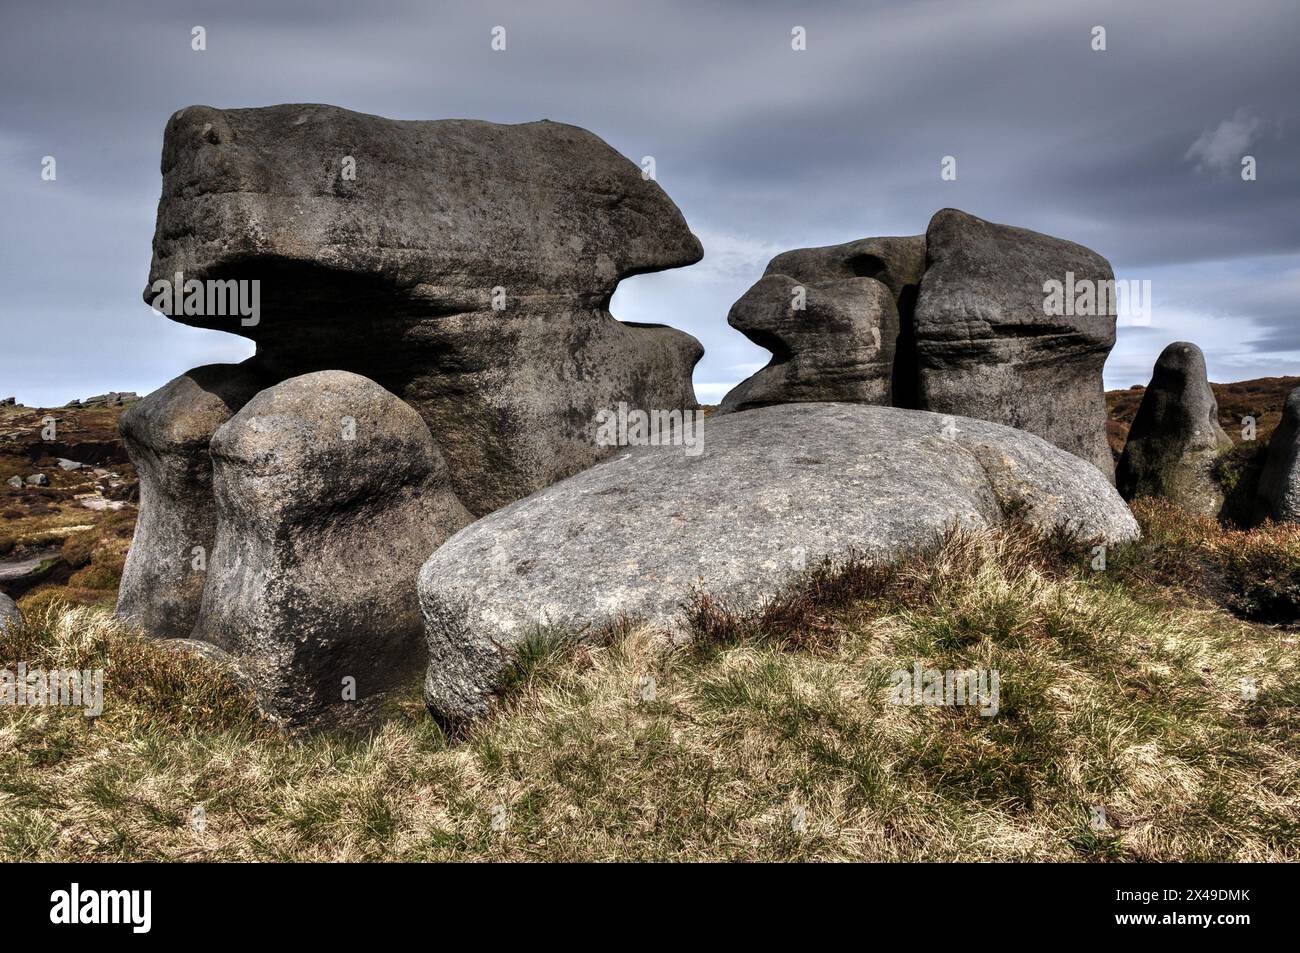 Massive, weird, eroded rock formations in the area known as The Woolpacks on Kinder Scout, Peak District. Looking like two lizards. Stock Photo